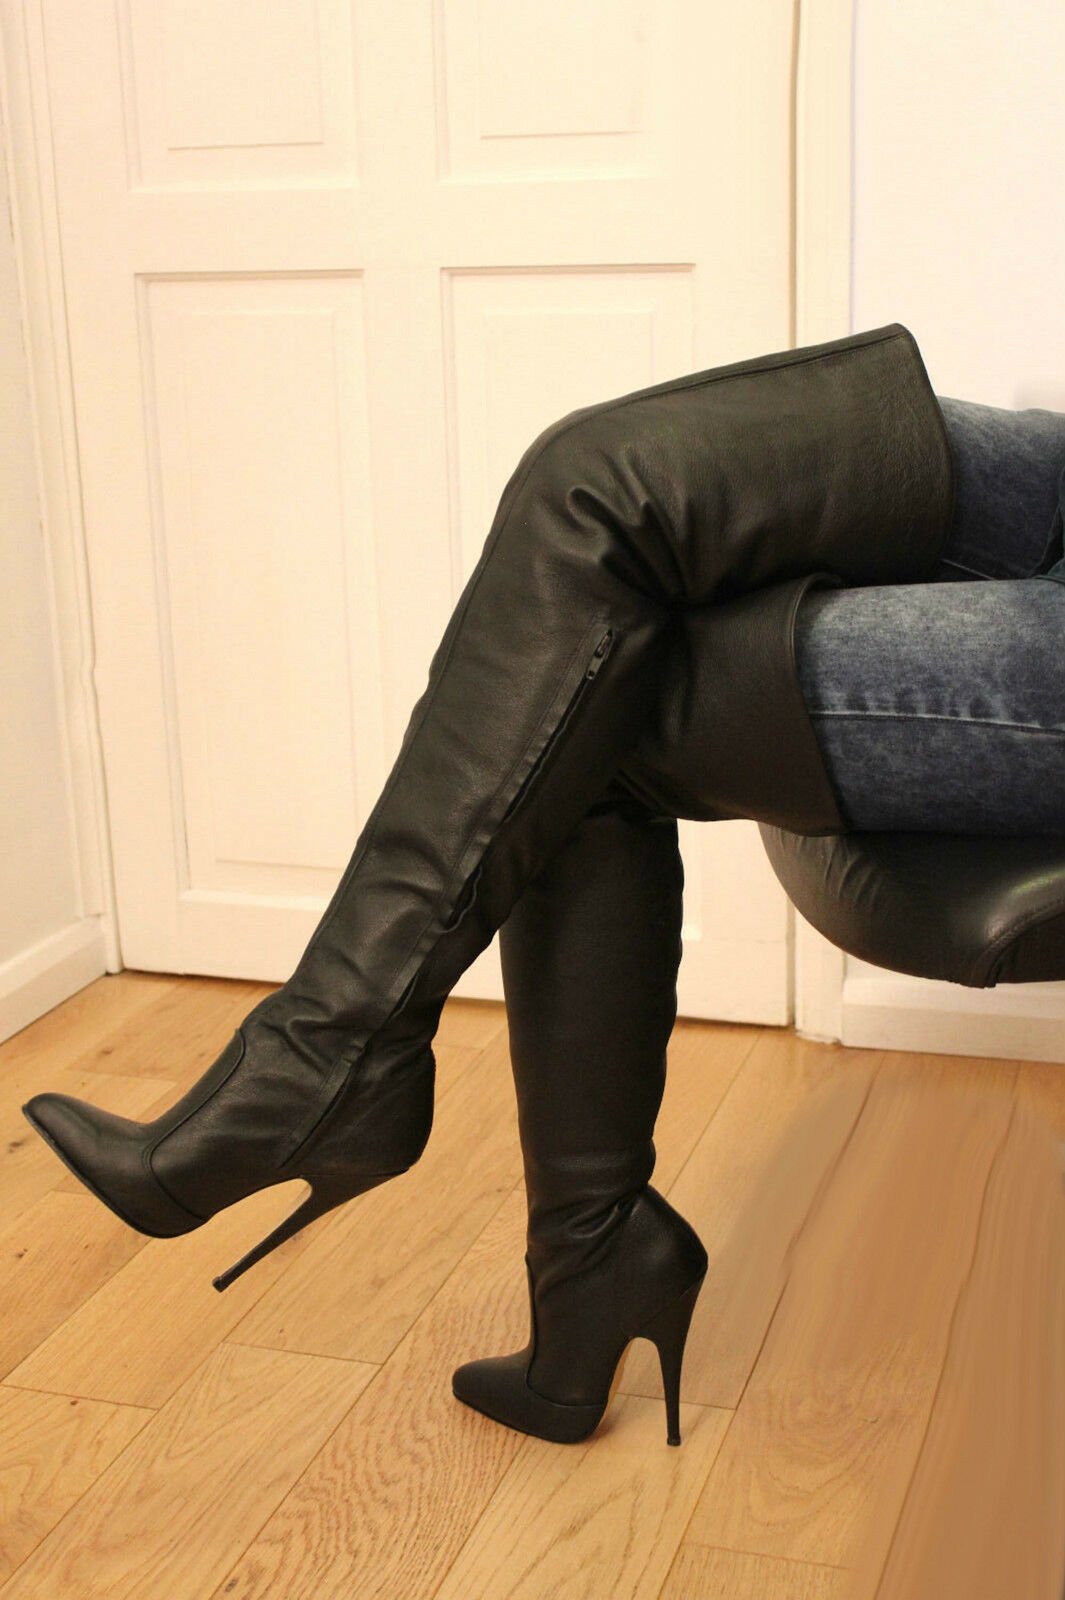 eBay Leather: FROM THE ARCHIVES - A real deal on vintage fetish boots